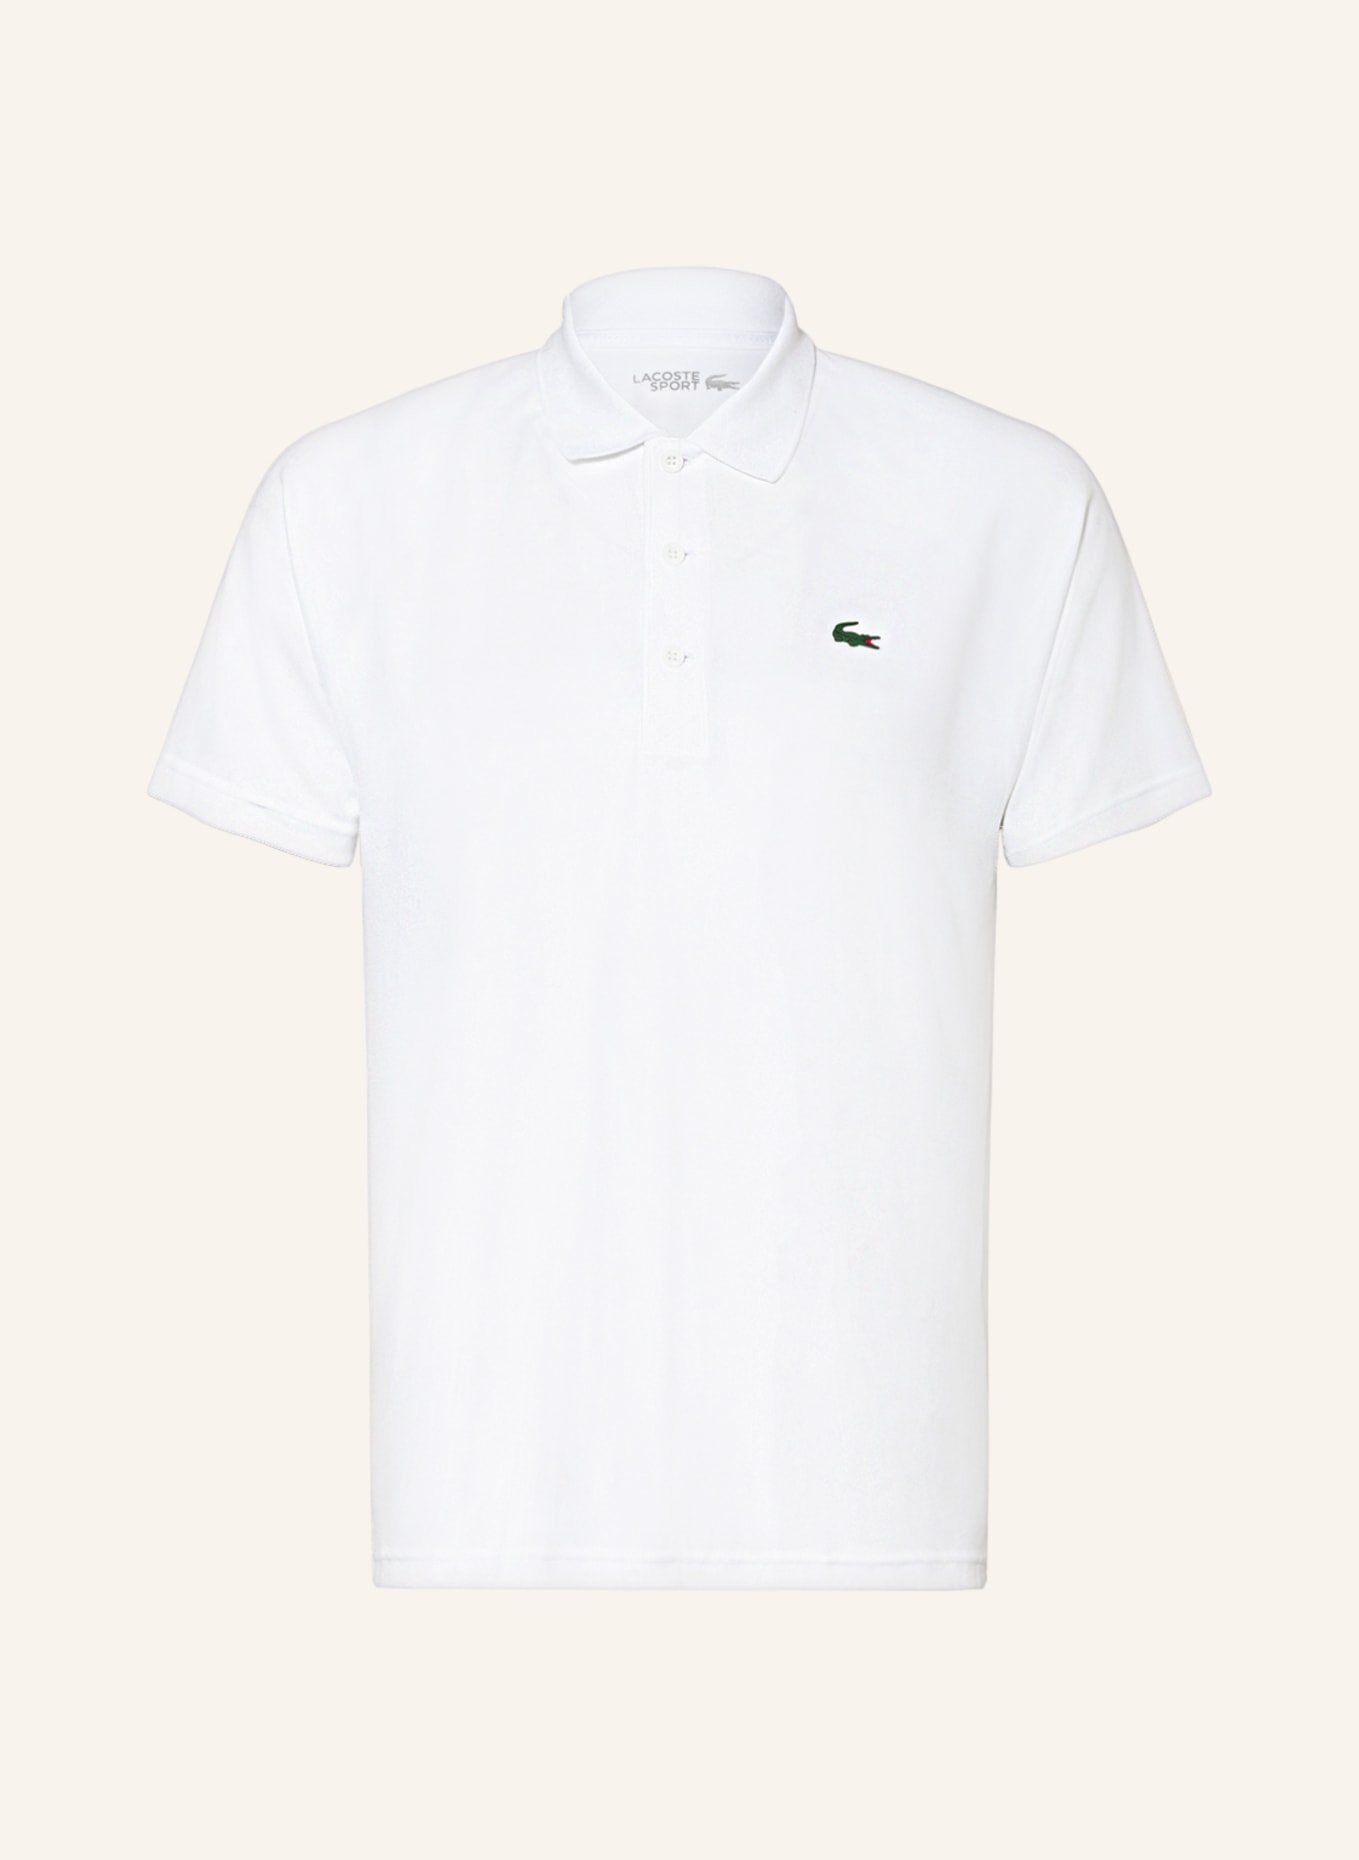 LACOSTE Funktions-Poloshirt, Farbe: WEISS (Bild 1)